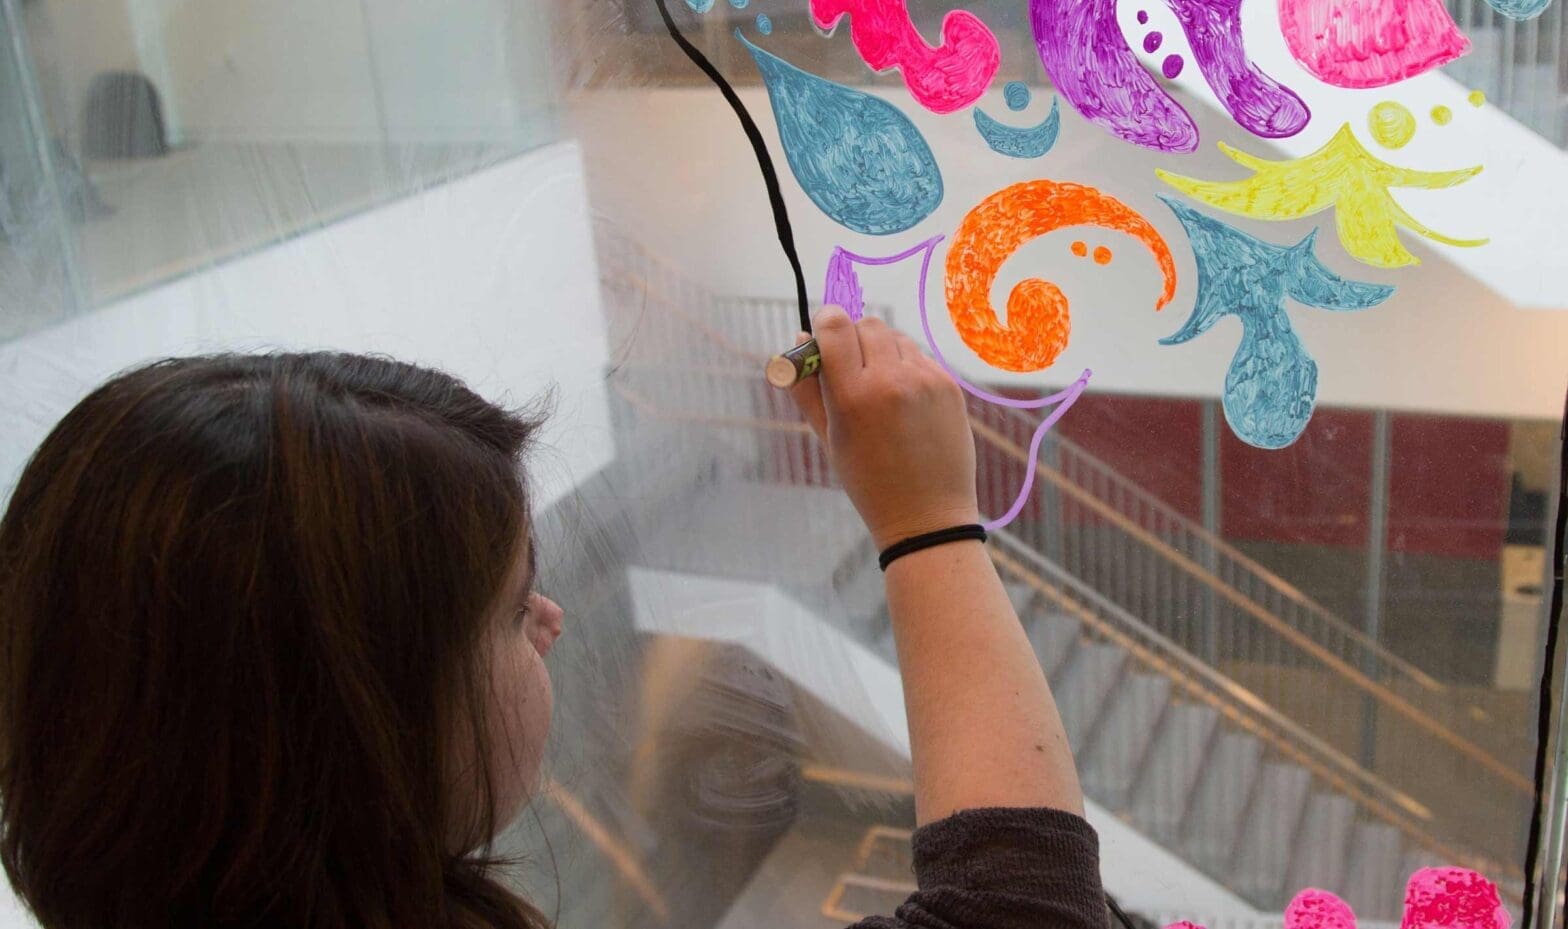 Students drawing on glass wall.